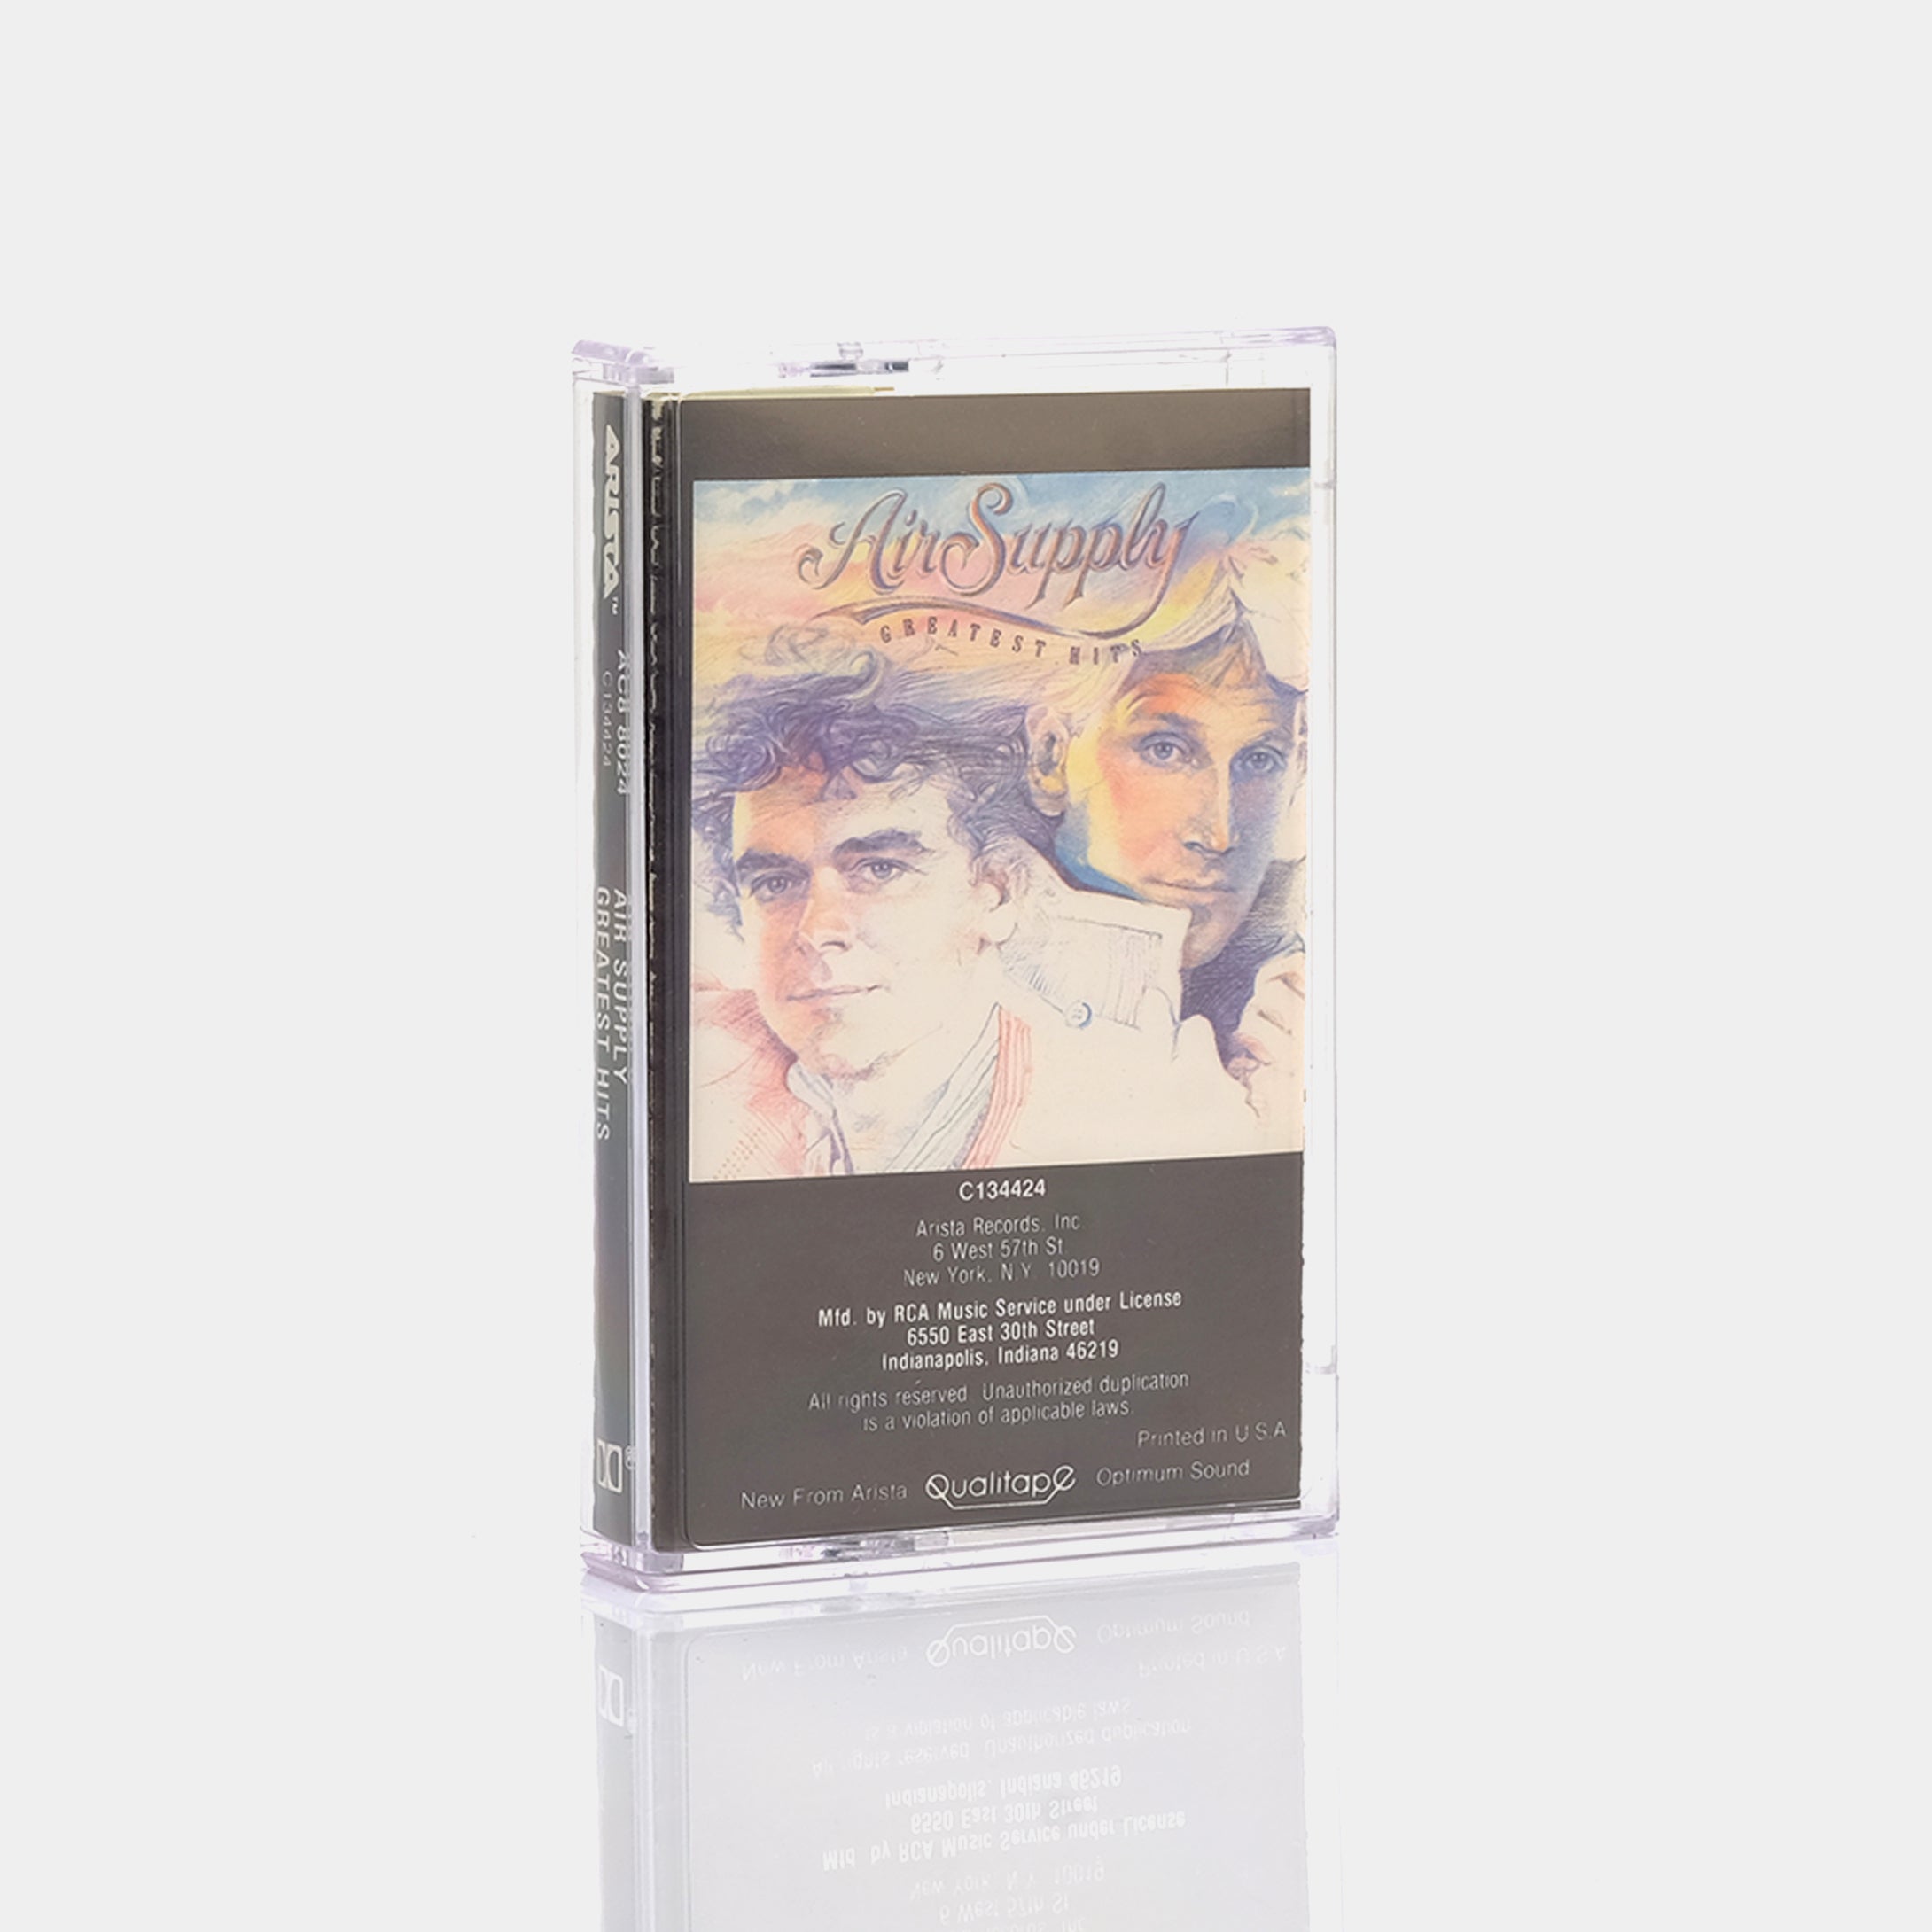 Air Supply - Greatest Hits Cassette Tape